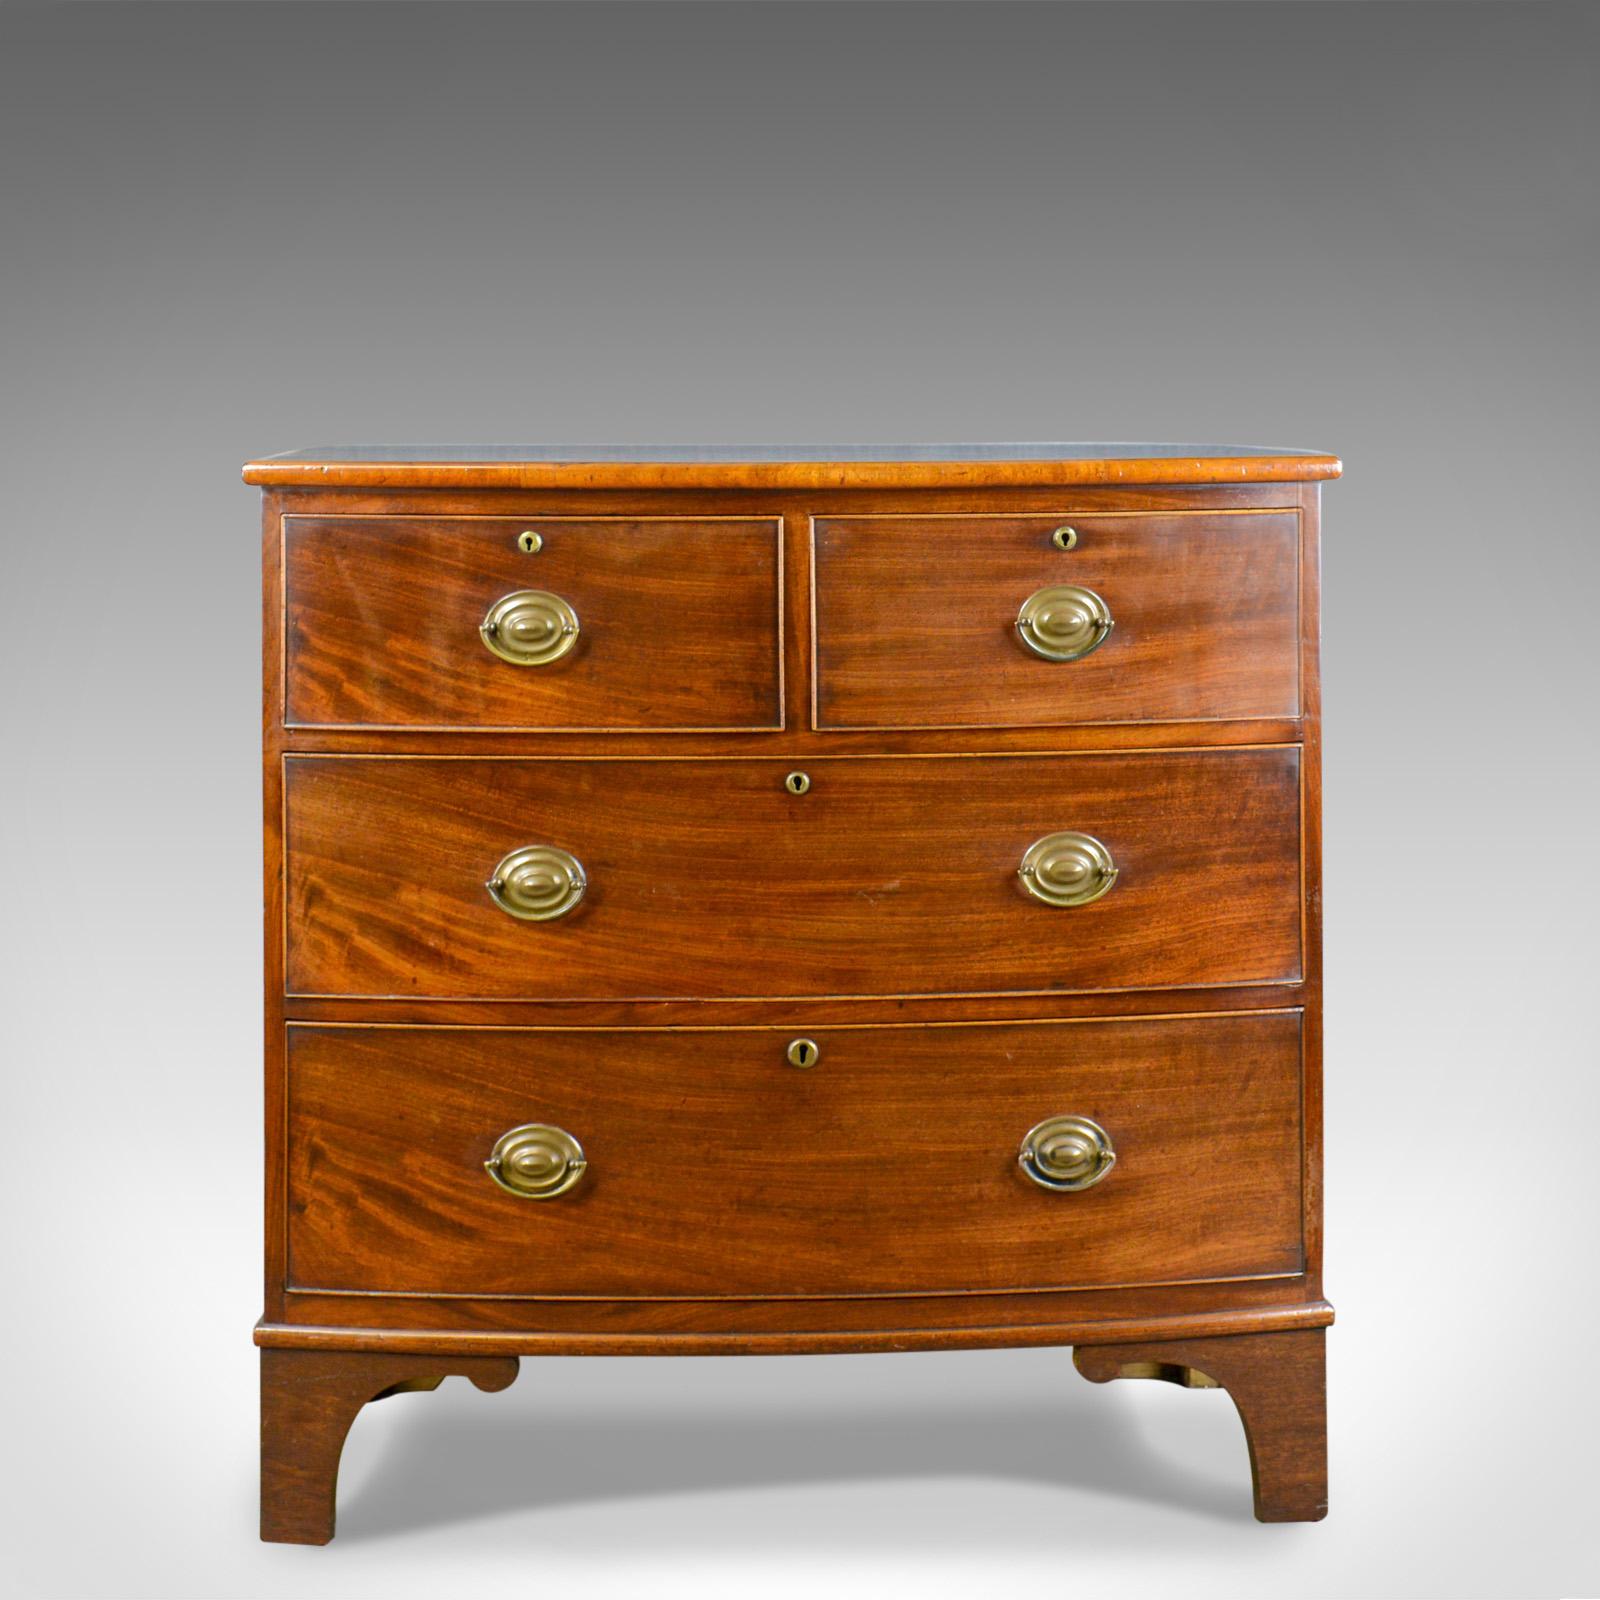 This is a Fine example of an antique bow front chest of drawers. An English, Georgian, mahogany chest dating to the late 18th century, circa 1790.

In quality mahogany with attractive grain and good color
Useful shallow proportions arranged in a